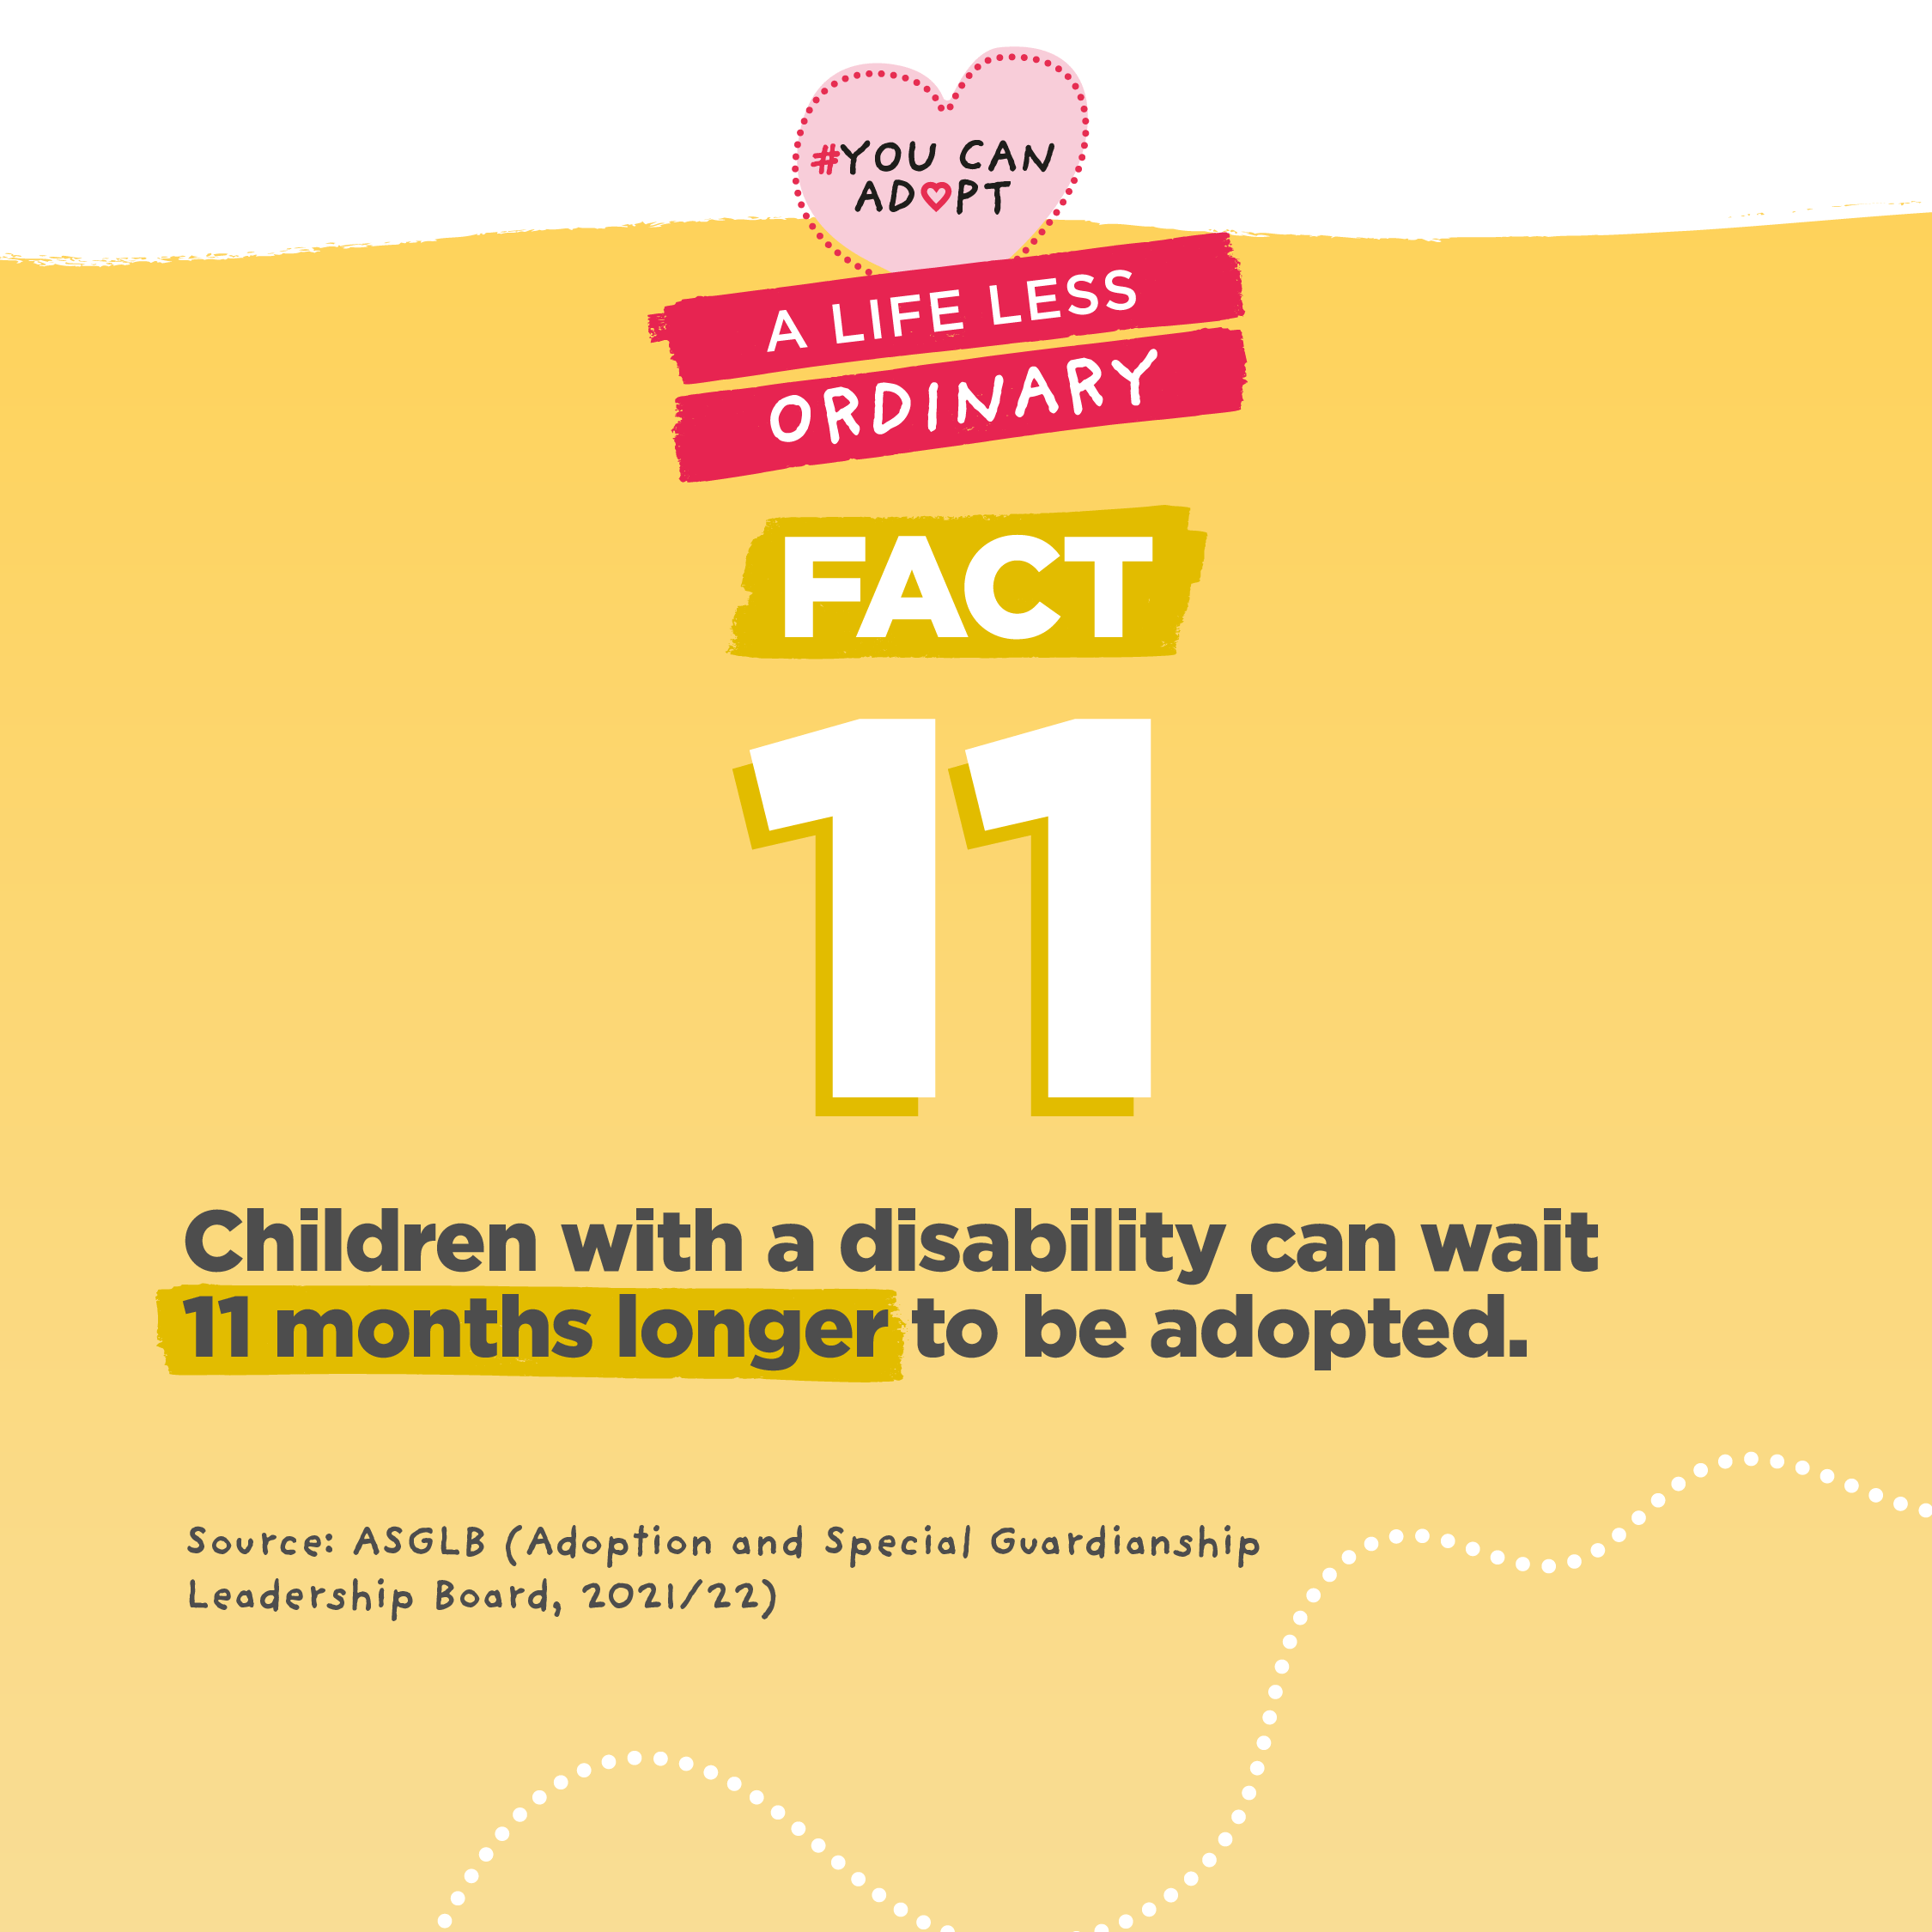 Children with a disability can wait 11 months longer to be adopted